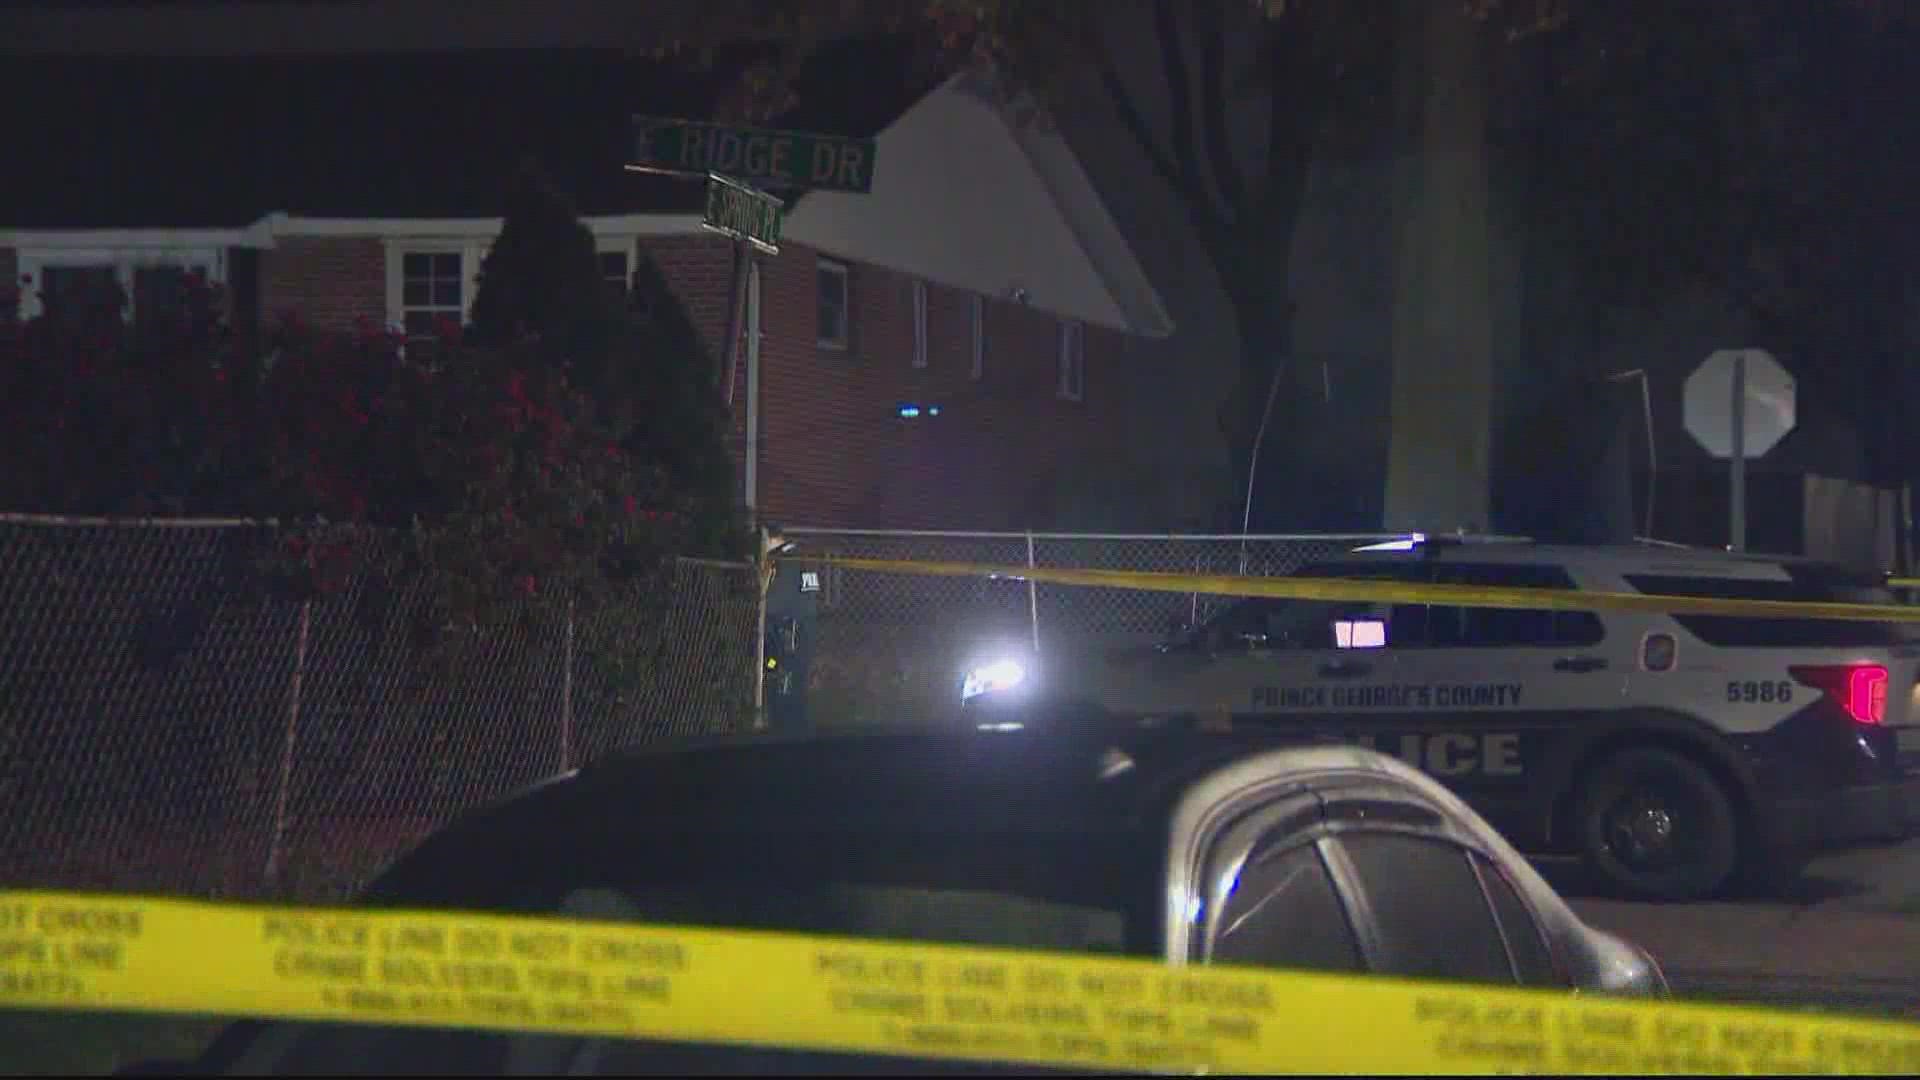 Police in Prince George's County are investigating an early-morning double shooting in Landover, Maryland on Thursday.